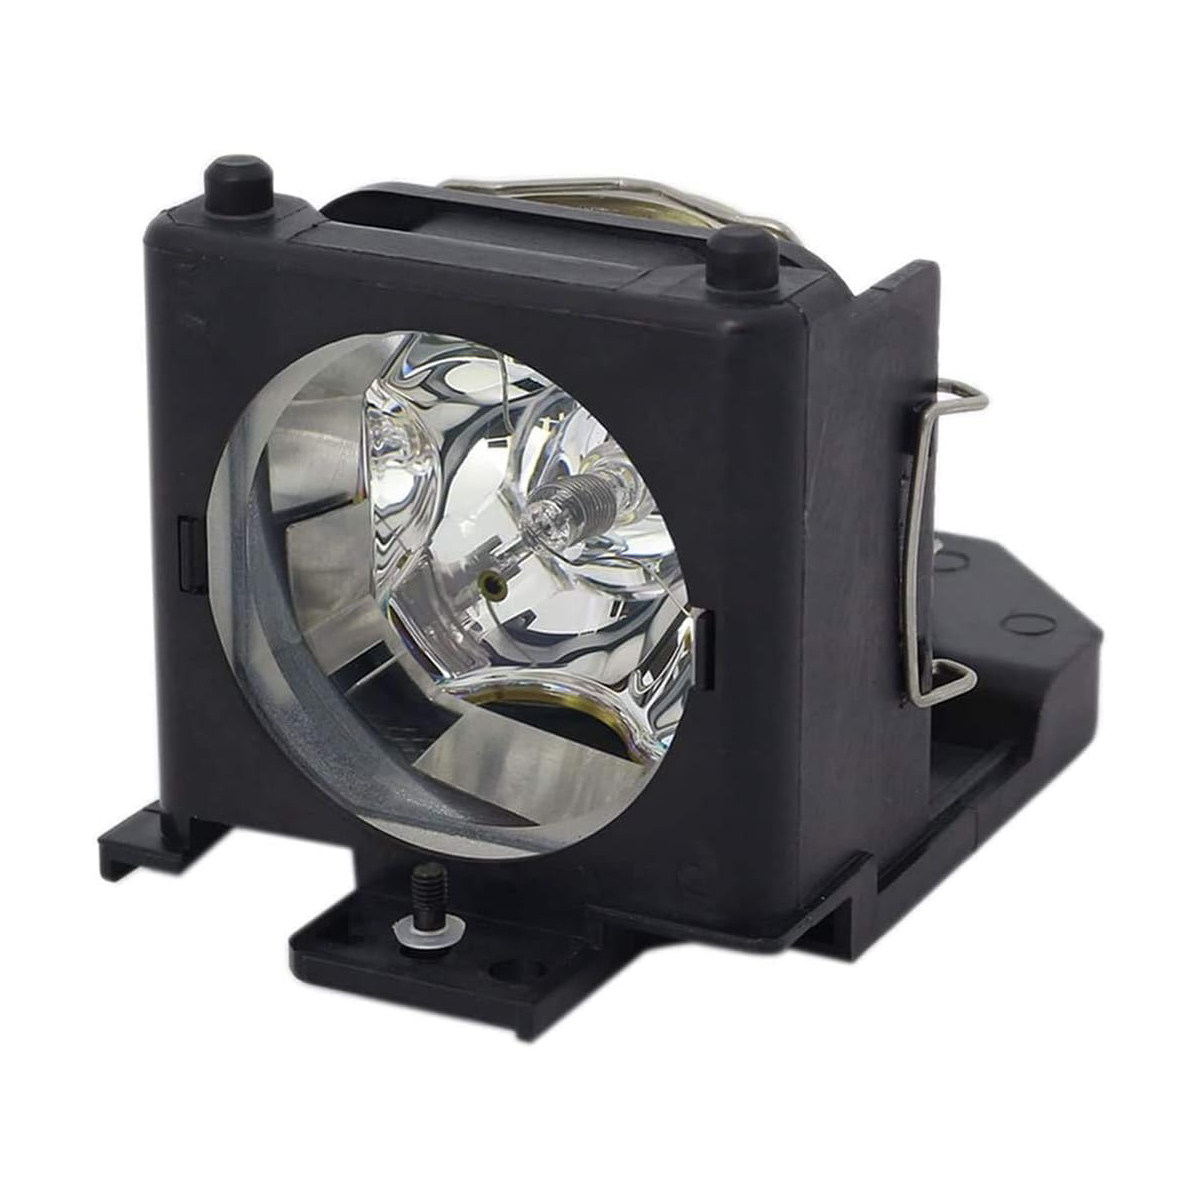 Replacement Projector lamp 456-8064 For Dukane Projector